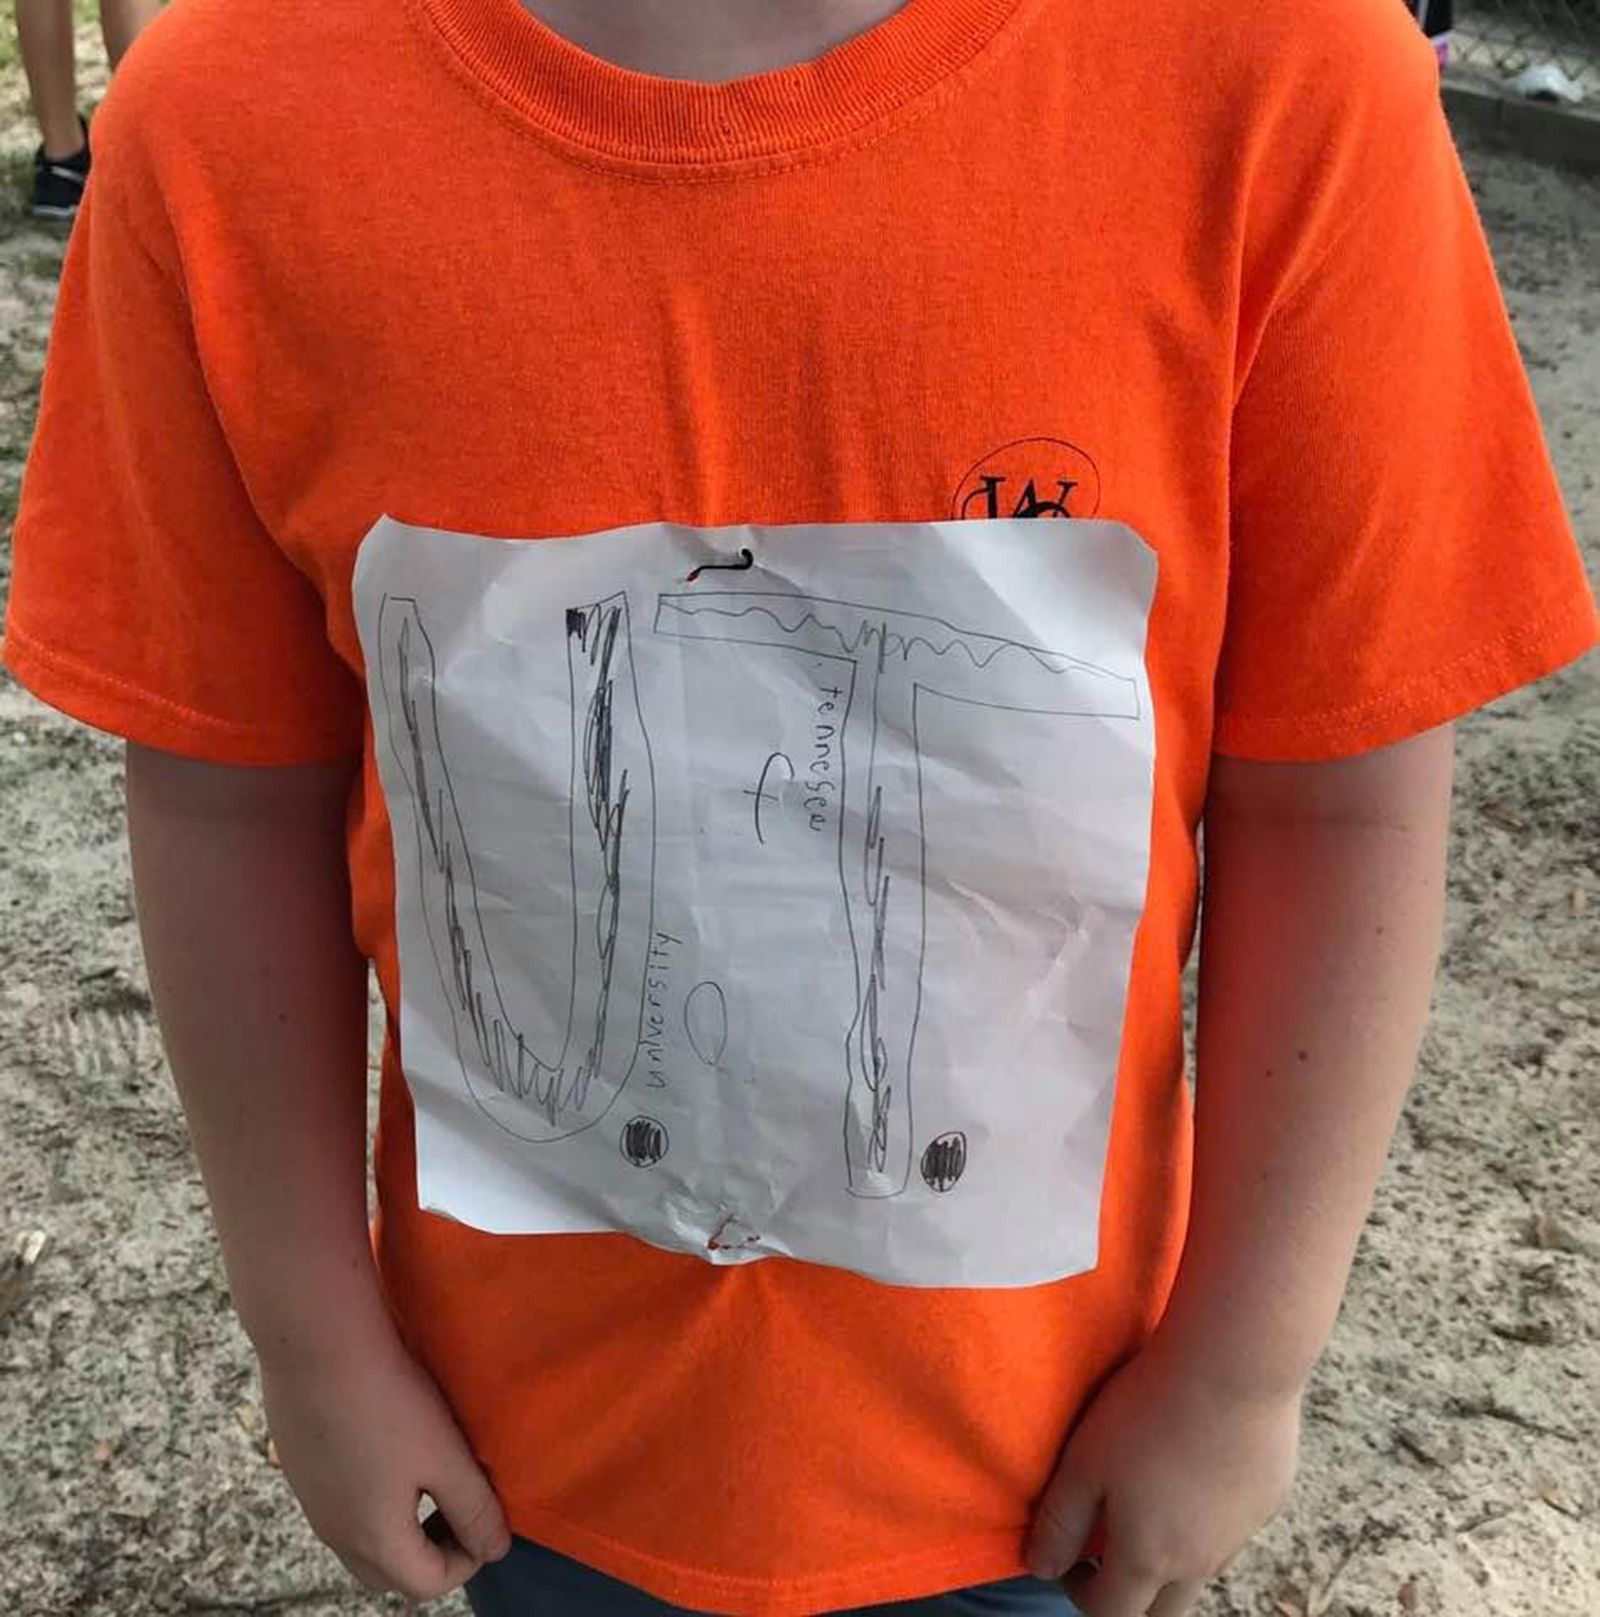 He was bullied for his homemade University of Tennessee T-shirt. The school  just made it an official design